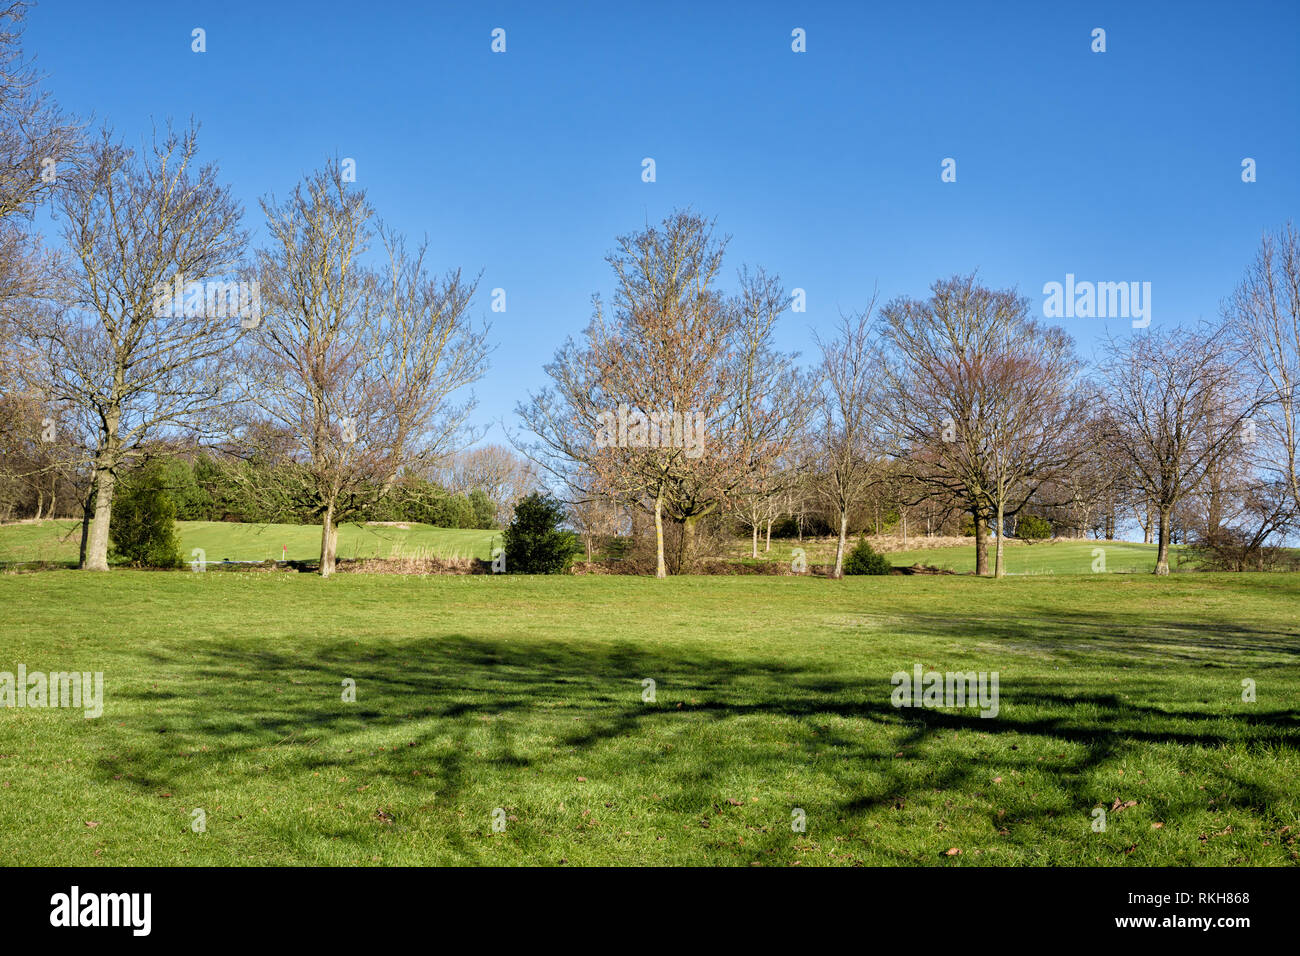 Trees with bare branches in a park on a bright sunny day. In the foreground, a beautiful shadow cast by a tree Stock Photo